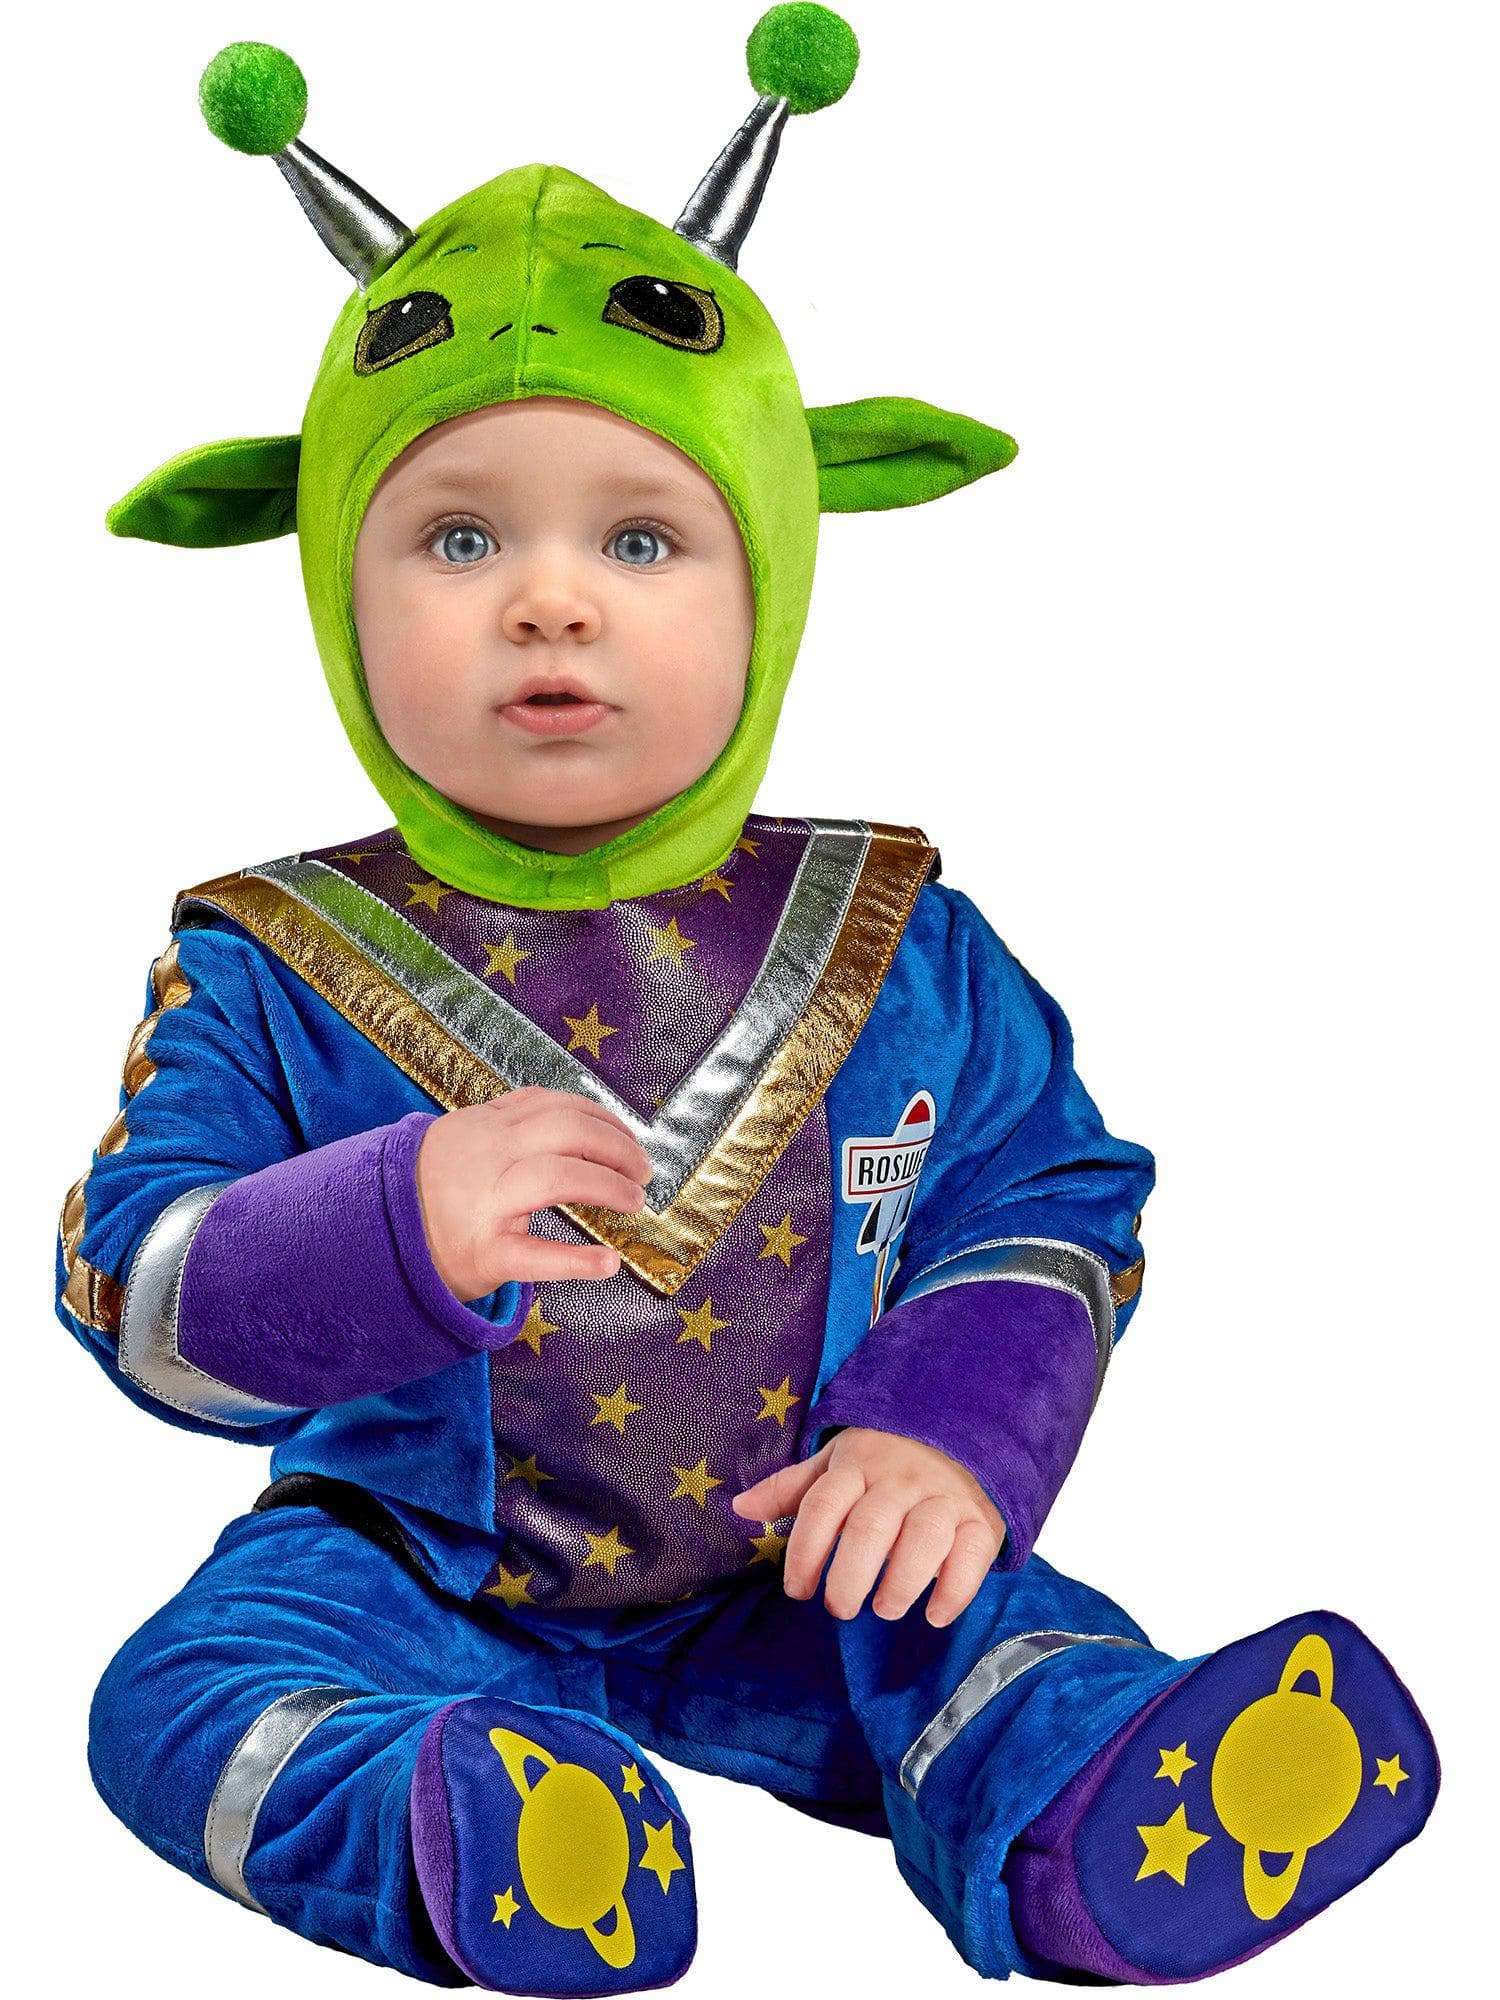 Roswell The Alien Baby/Toddler Costume - costumes.com